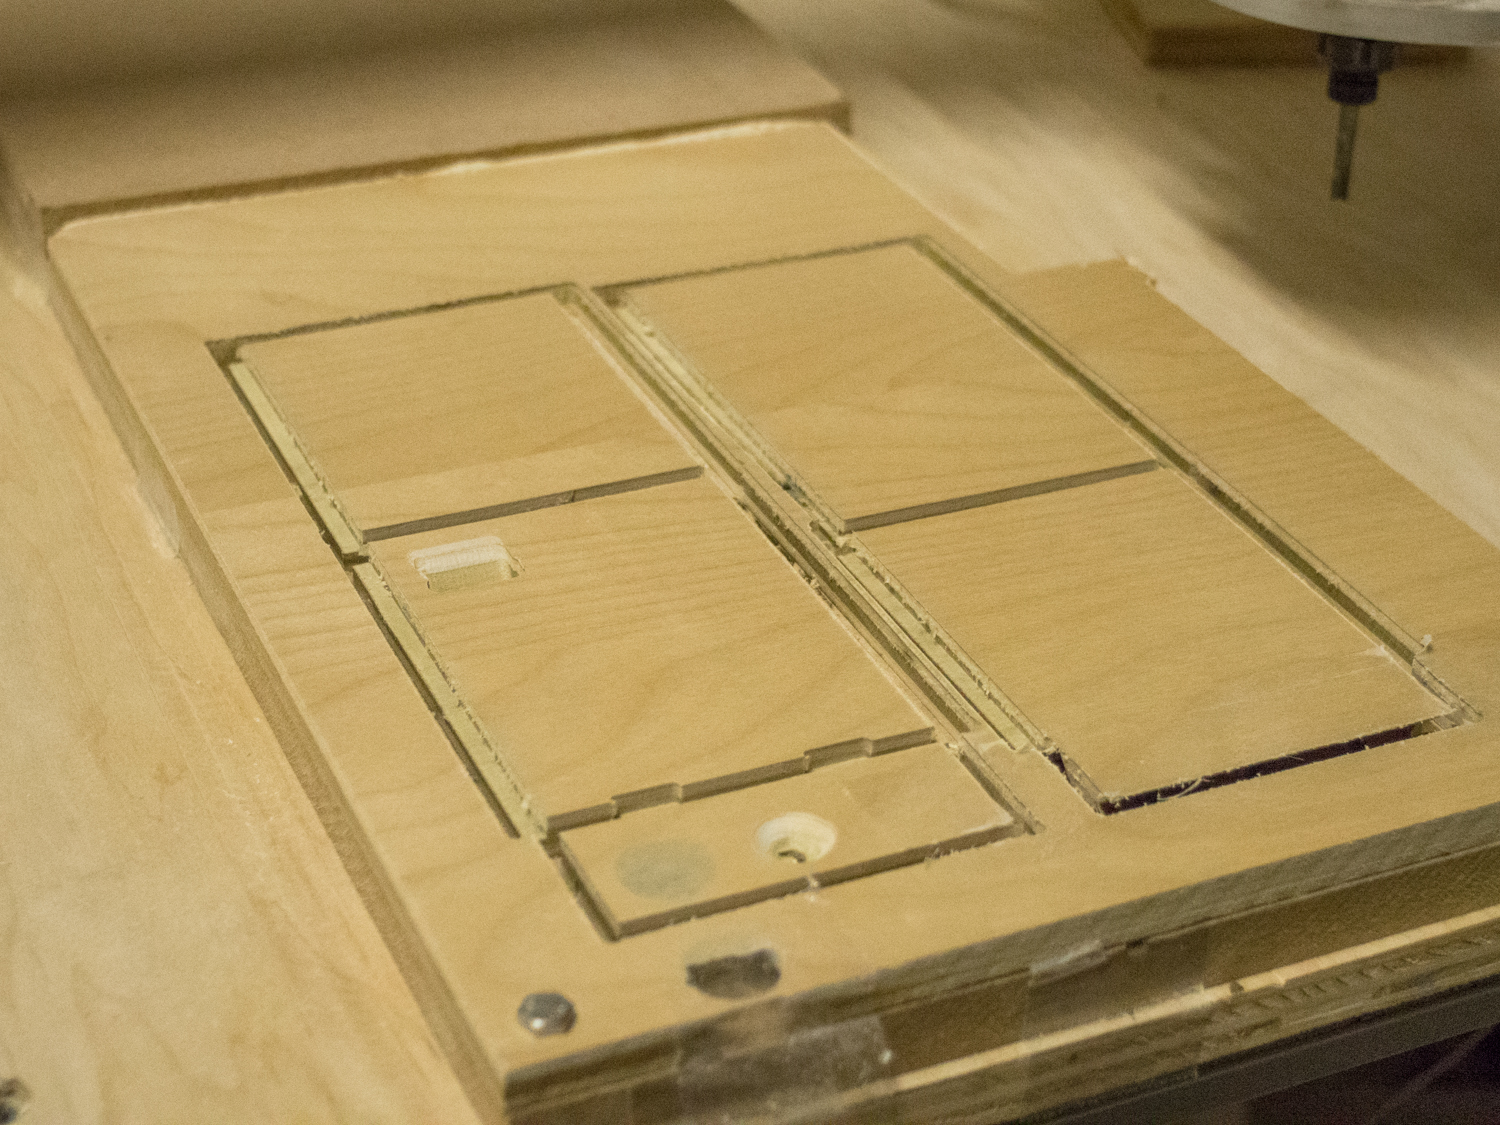 A prototype box was machined out of wood, the final product is white Delrin